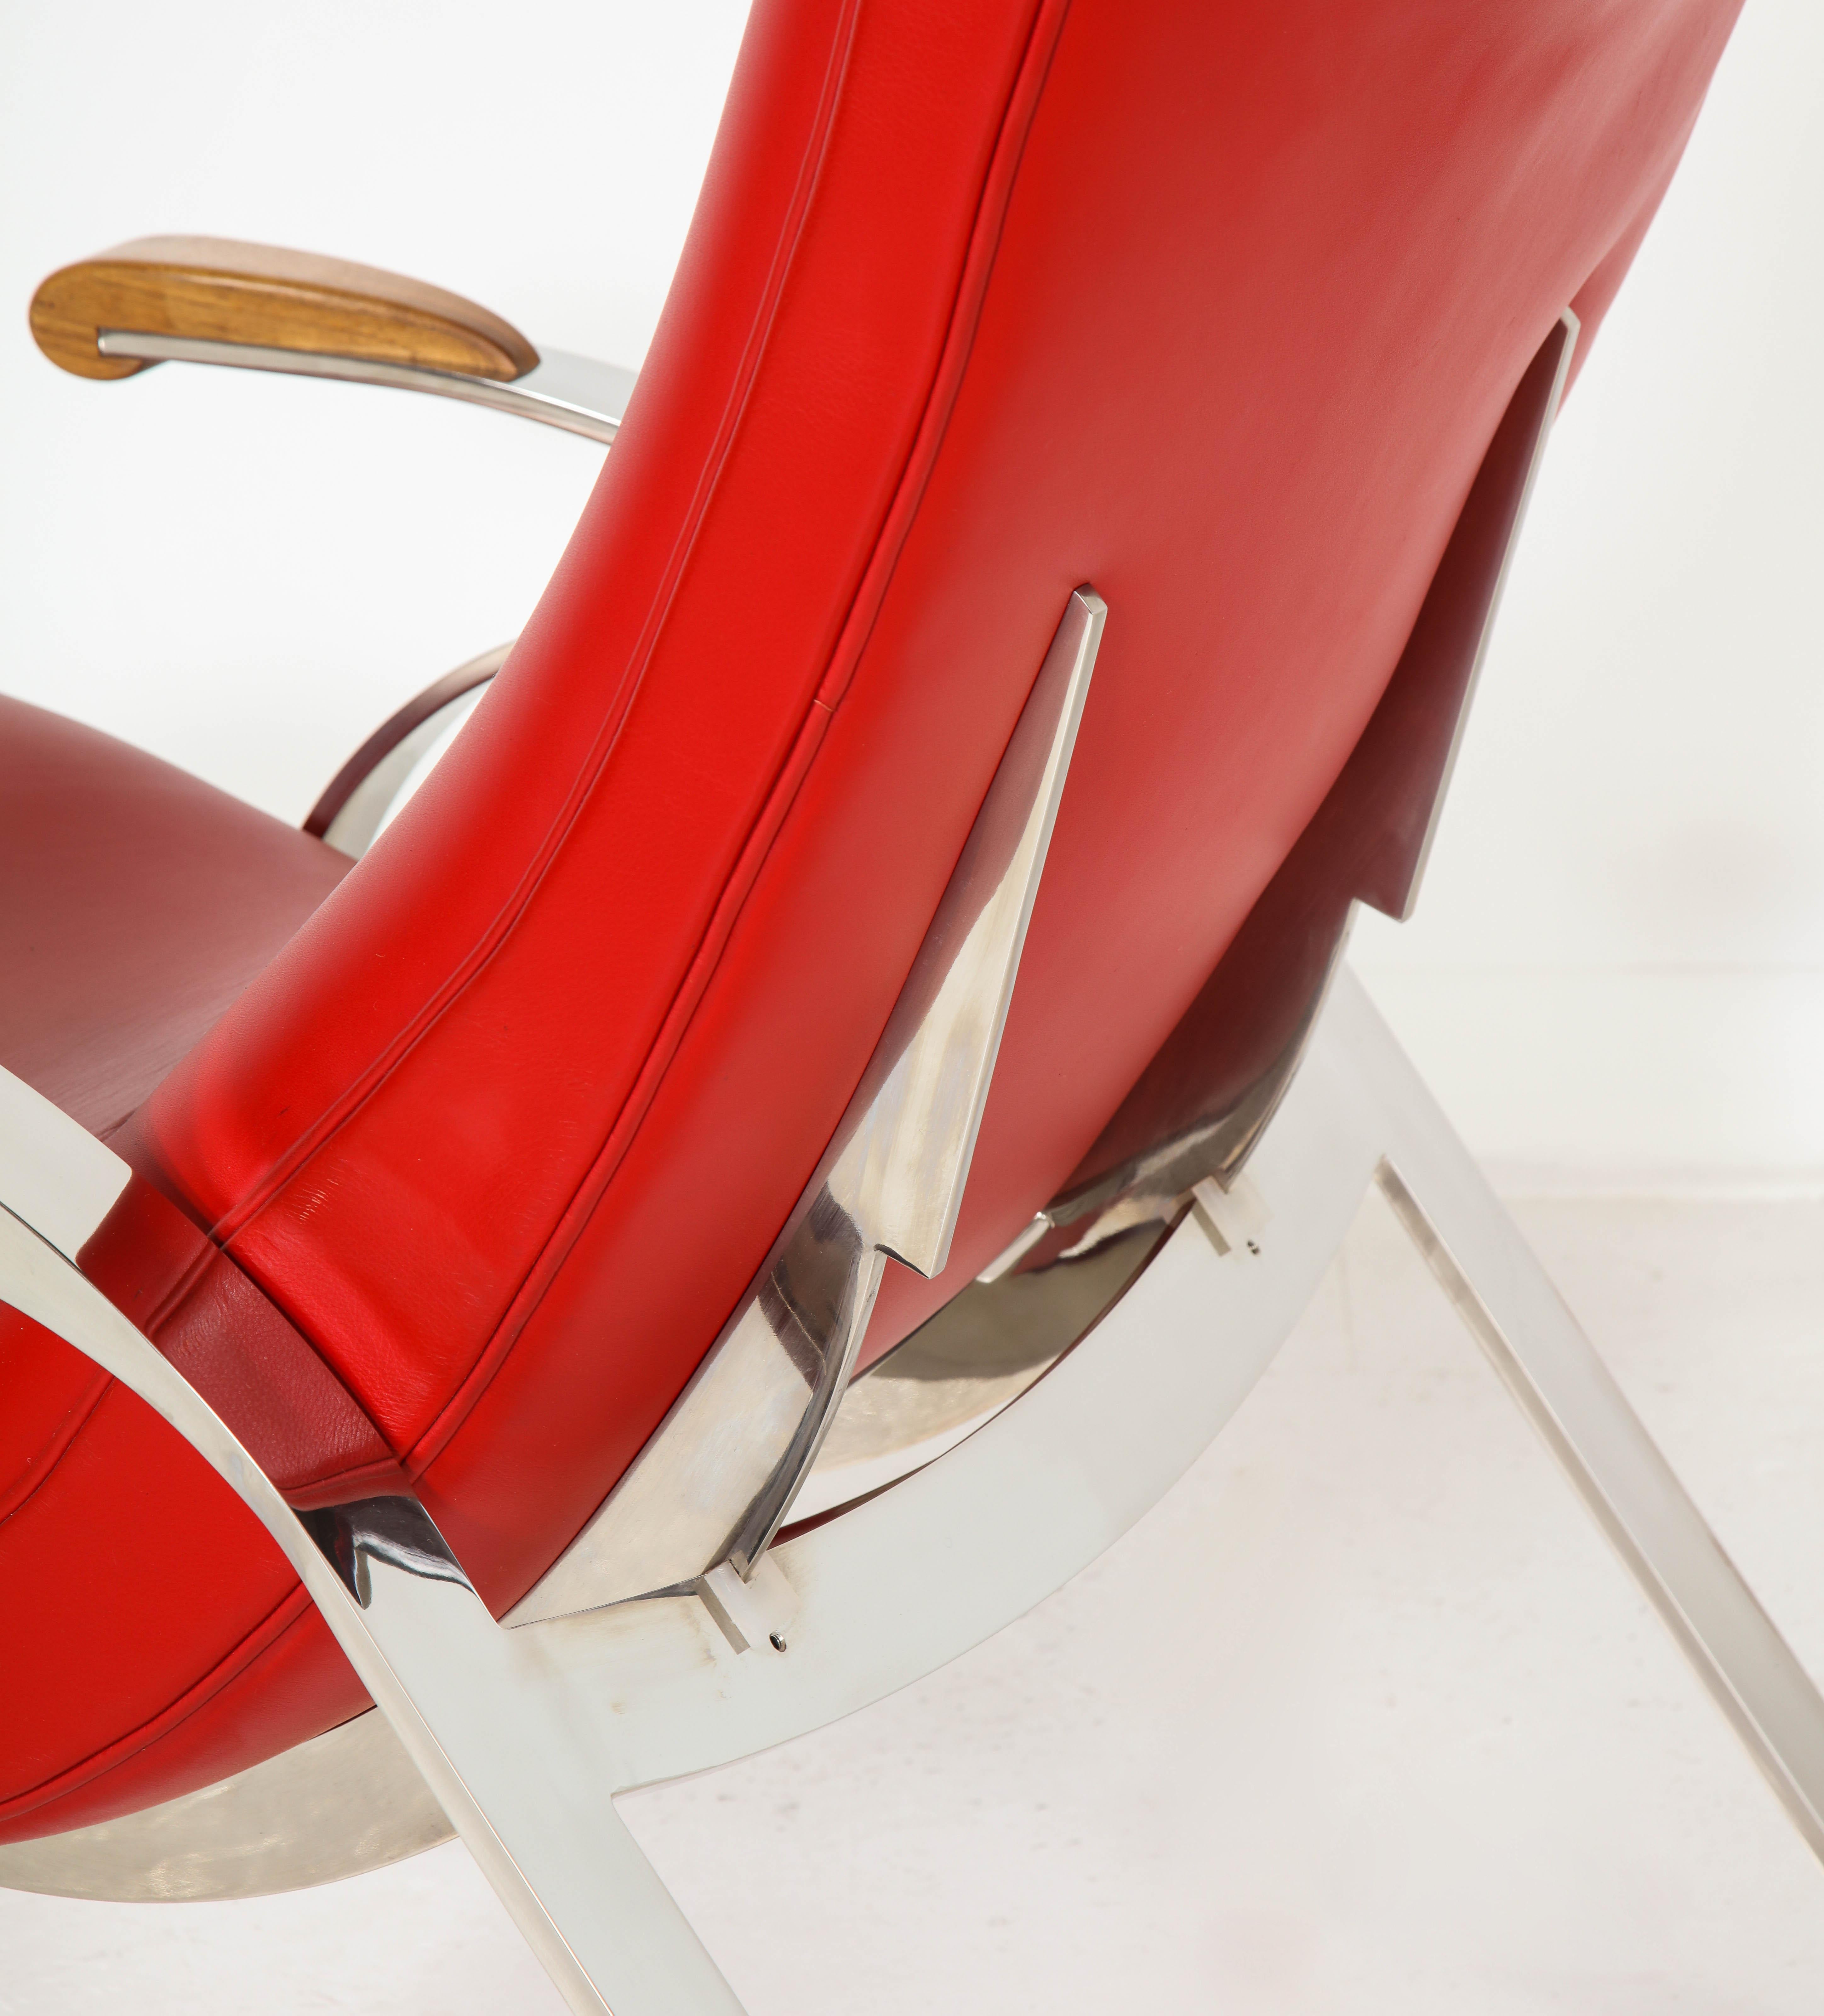 Contemporary Multi-Position Reclining Chair in Red Offered by Vladimir Kagan Design Group For Sale